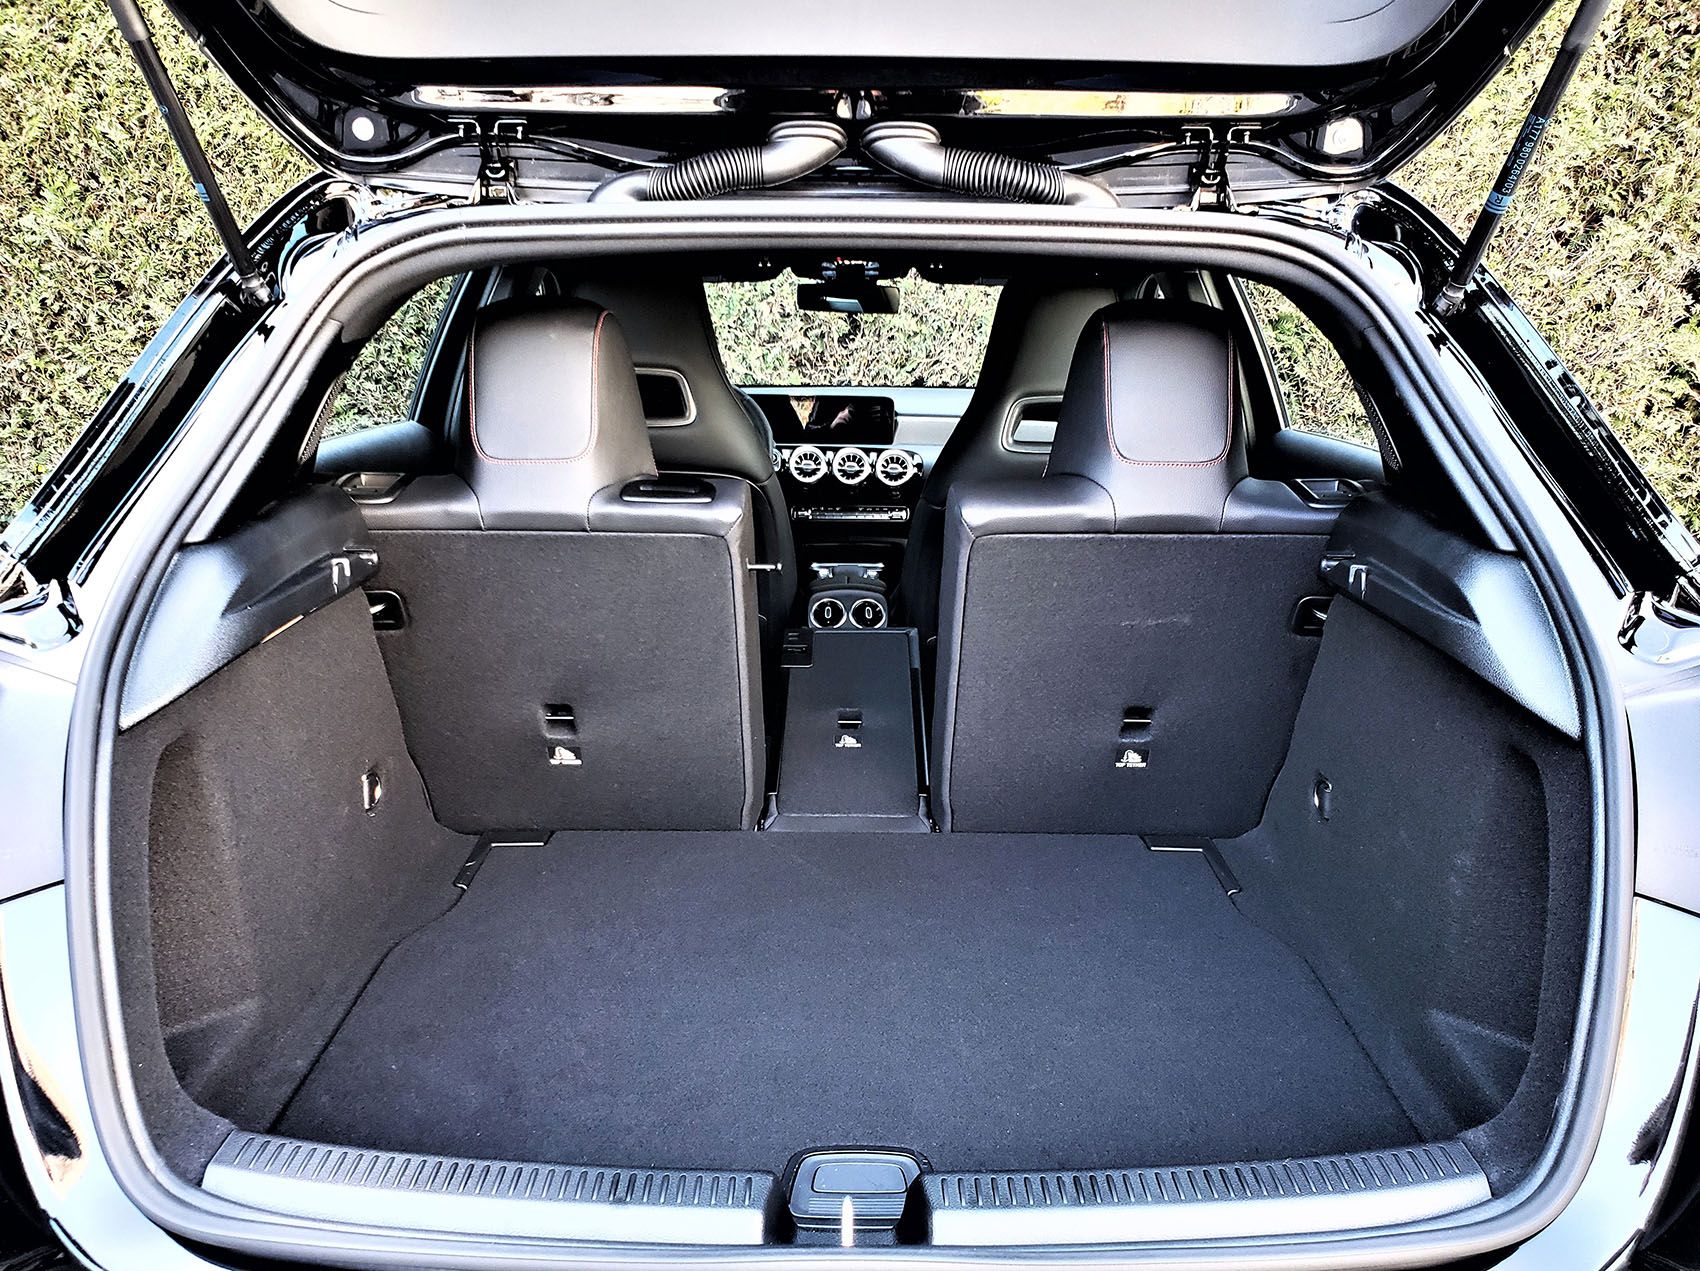 The Hatch is a much more practical car than the Sedan, thanks to its roomy cargo compartment.